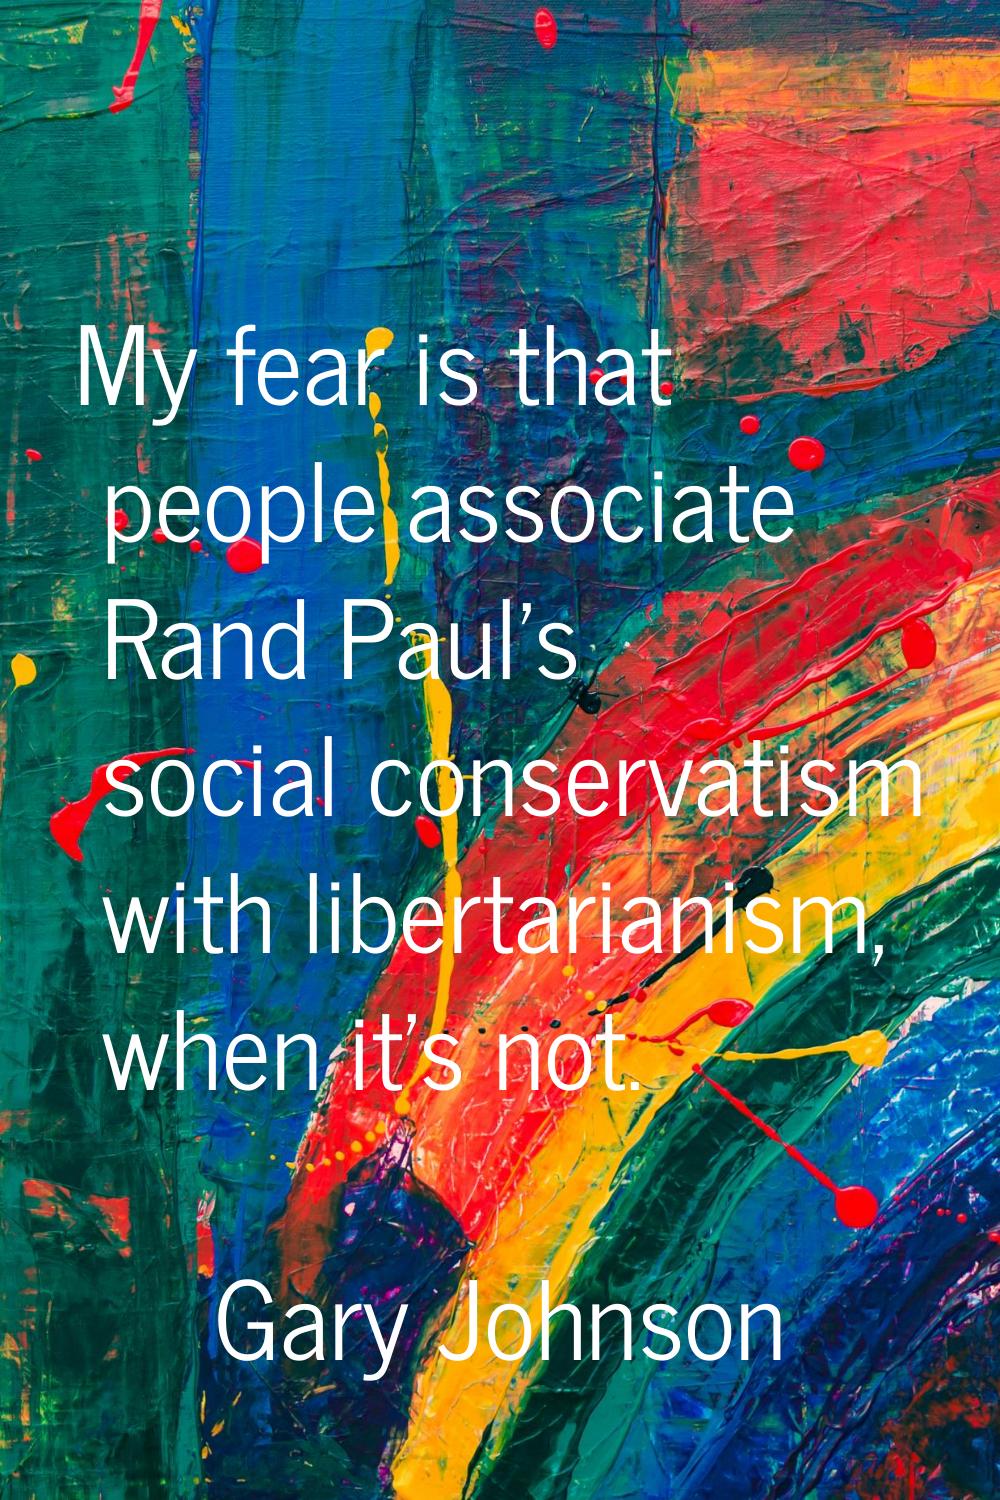 My fear is that people associate Rand Paul's social conservatism with libertarianism, when it's not